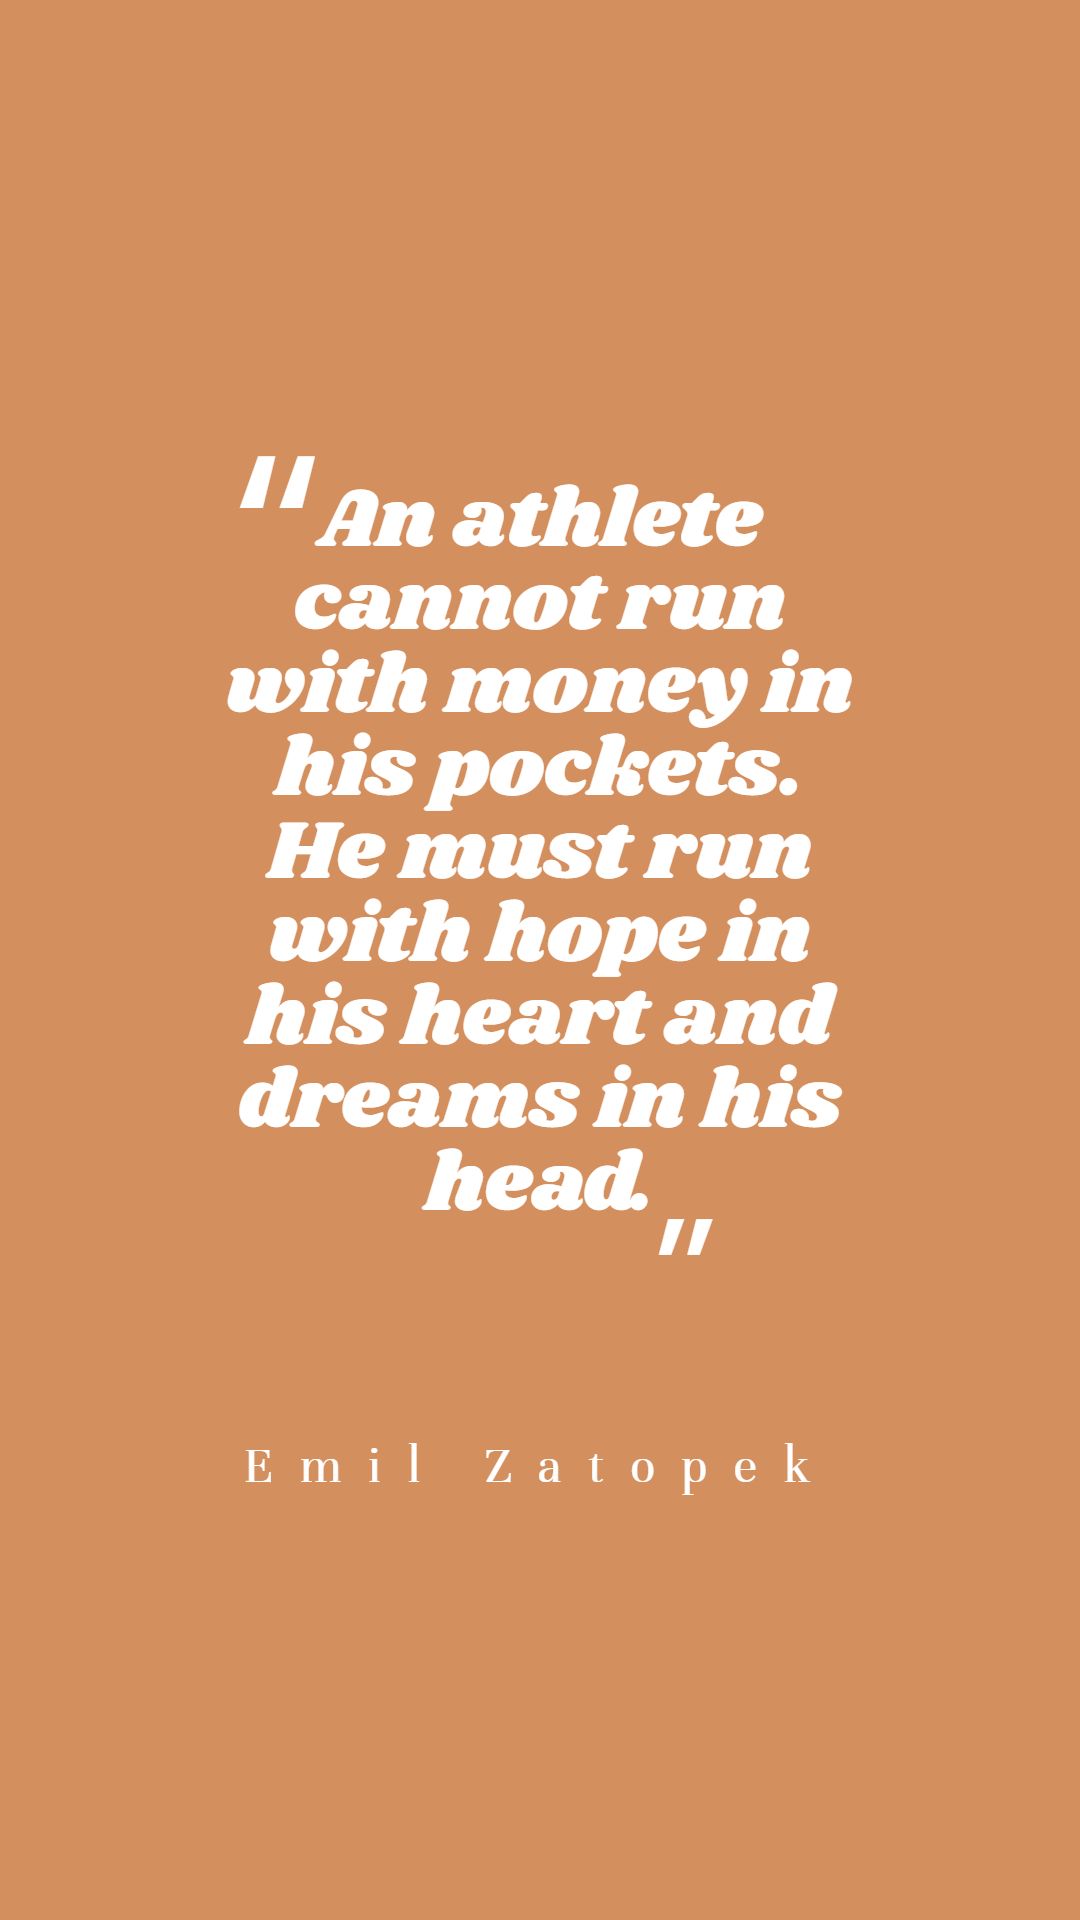 An athlete cannot run with money in his pockets. He must run with hope in his heart and dreams in his head.